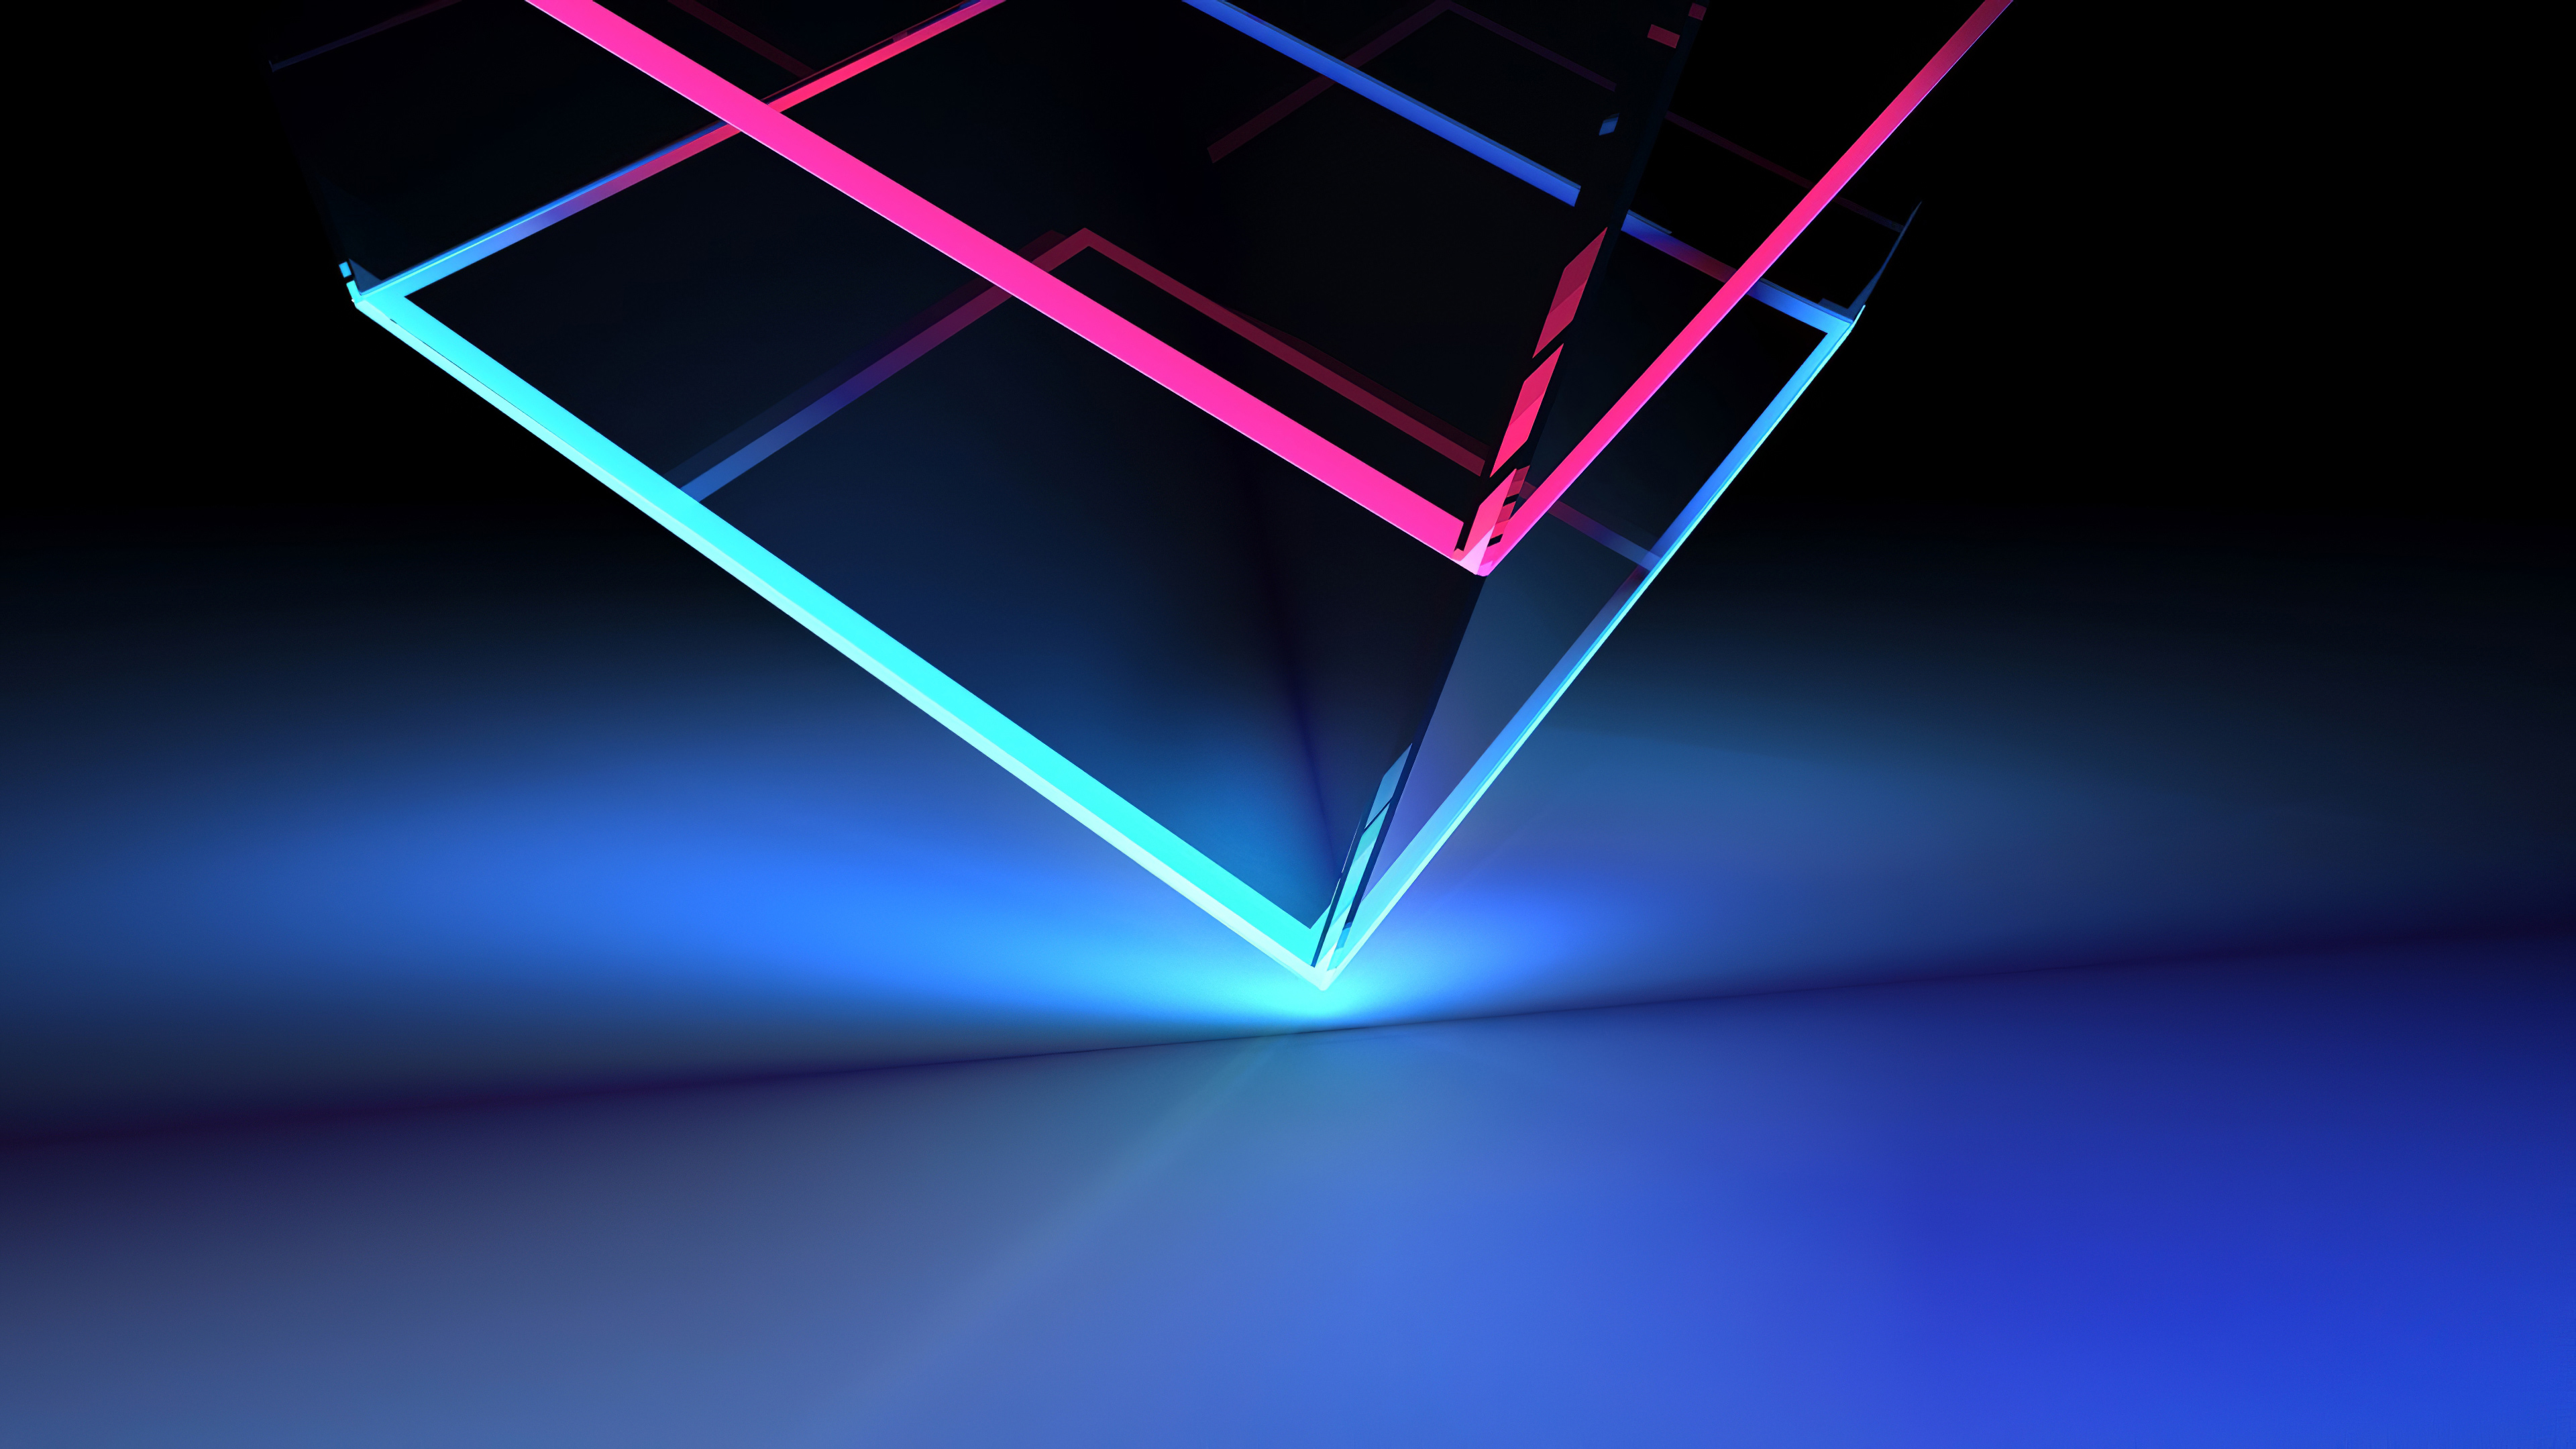 Download wallpaper 1920x1080 cube circuit chips glow neon full hd  hdtv fhd 1080p hd background